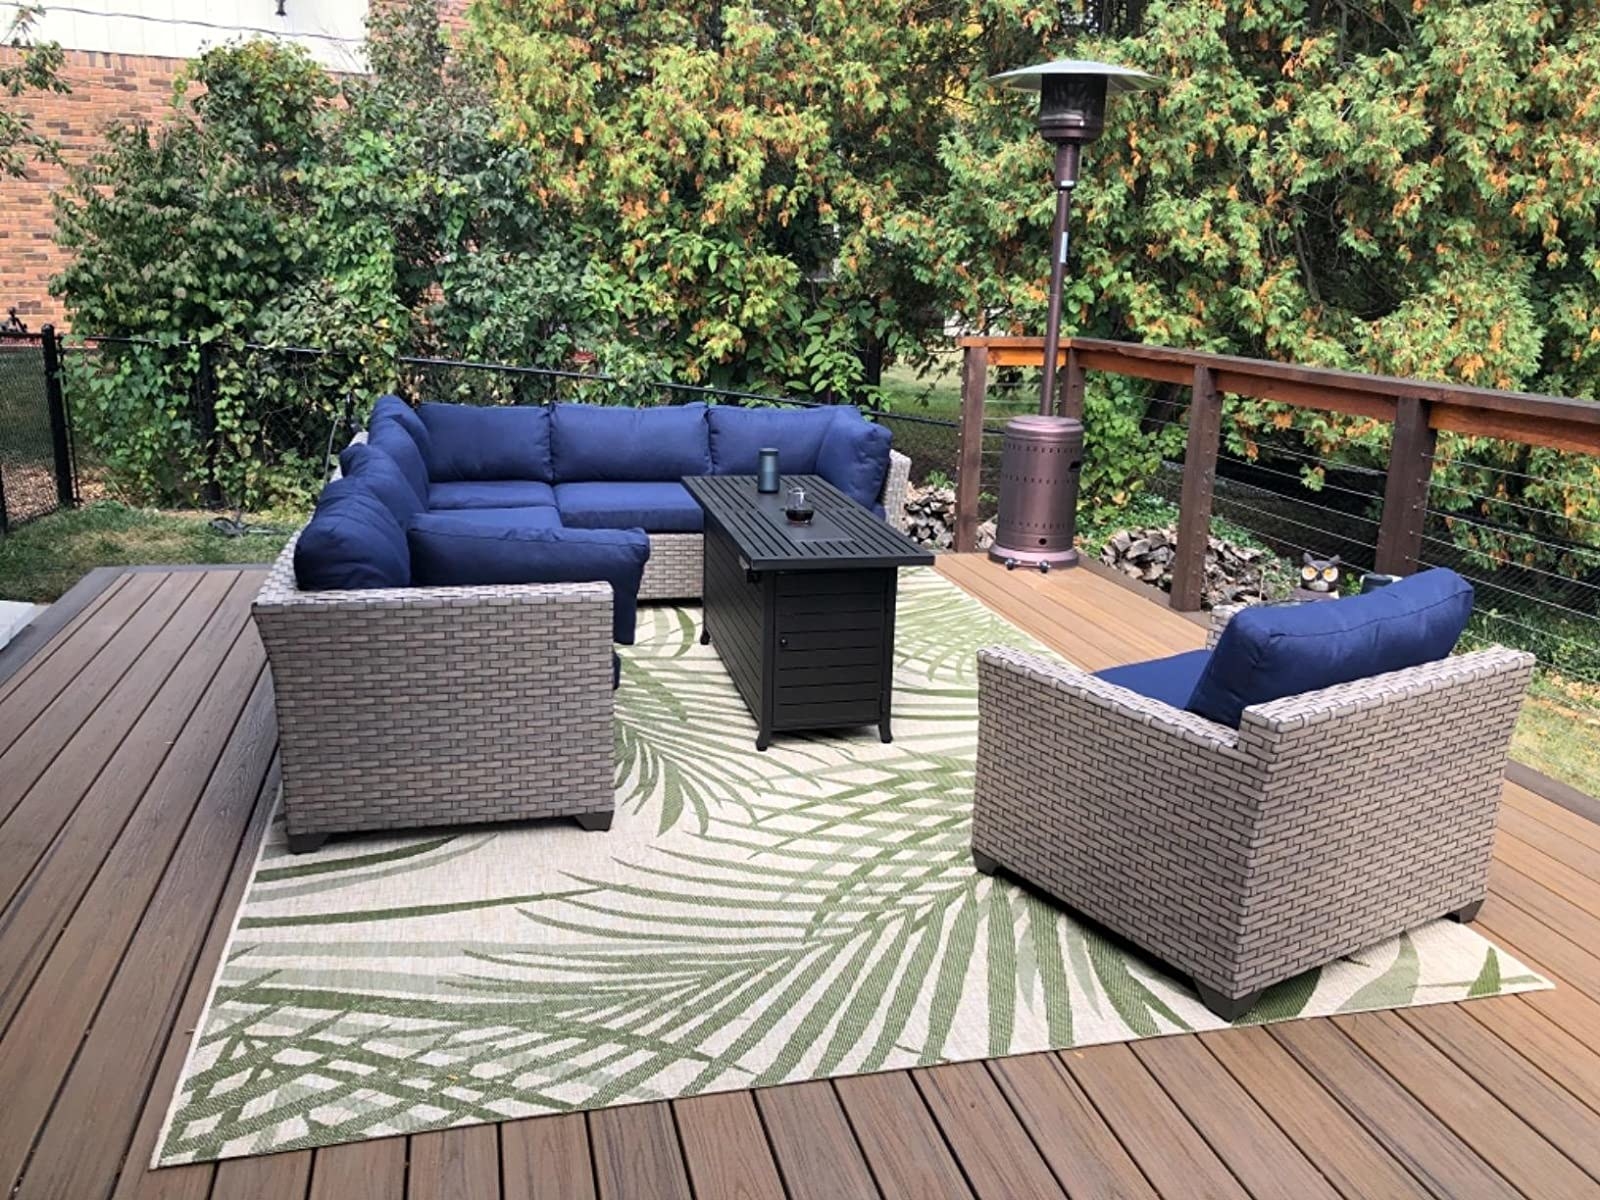 a white and green fern patterned rug underneath patio furniture